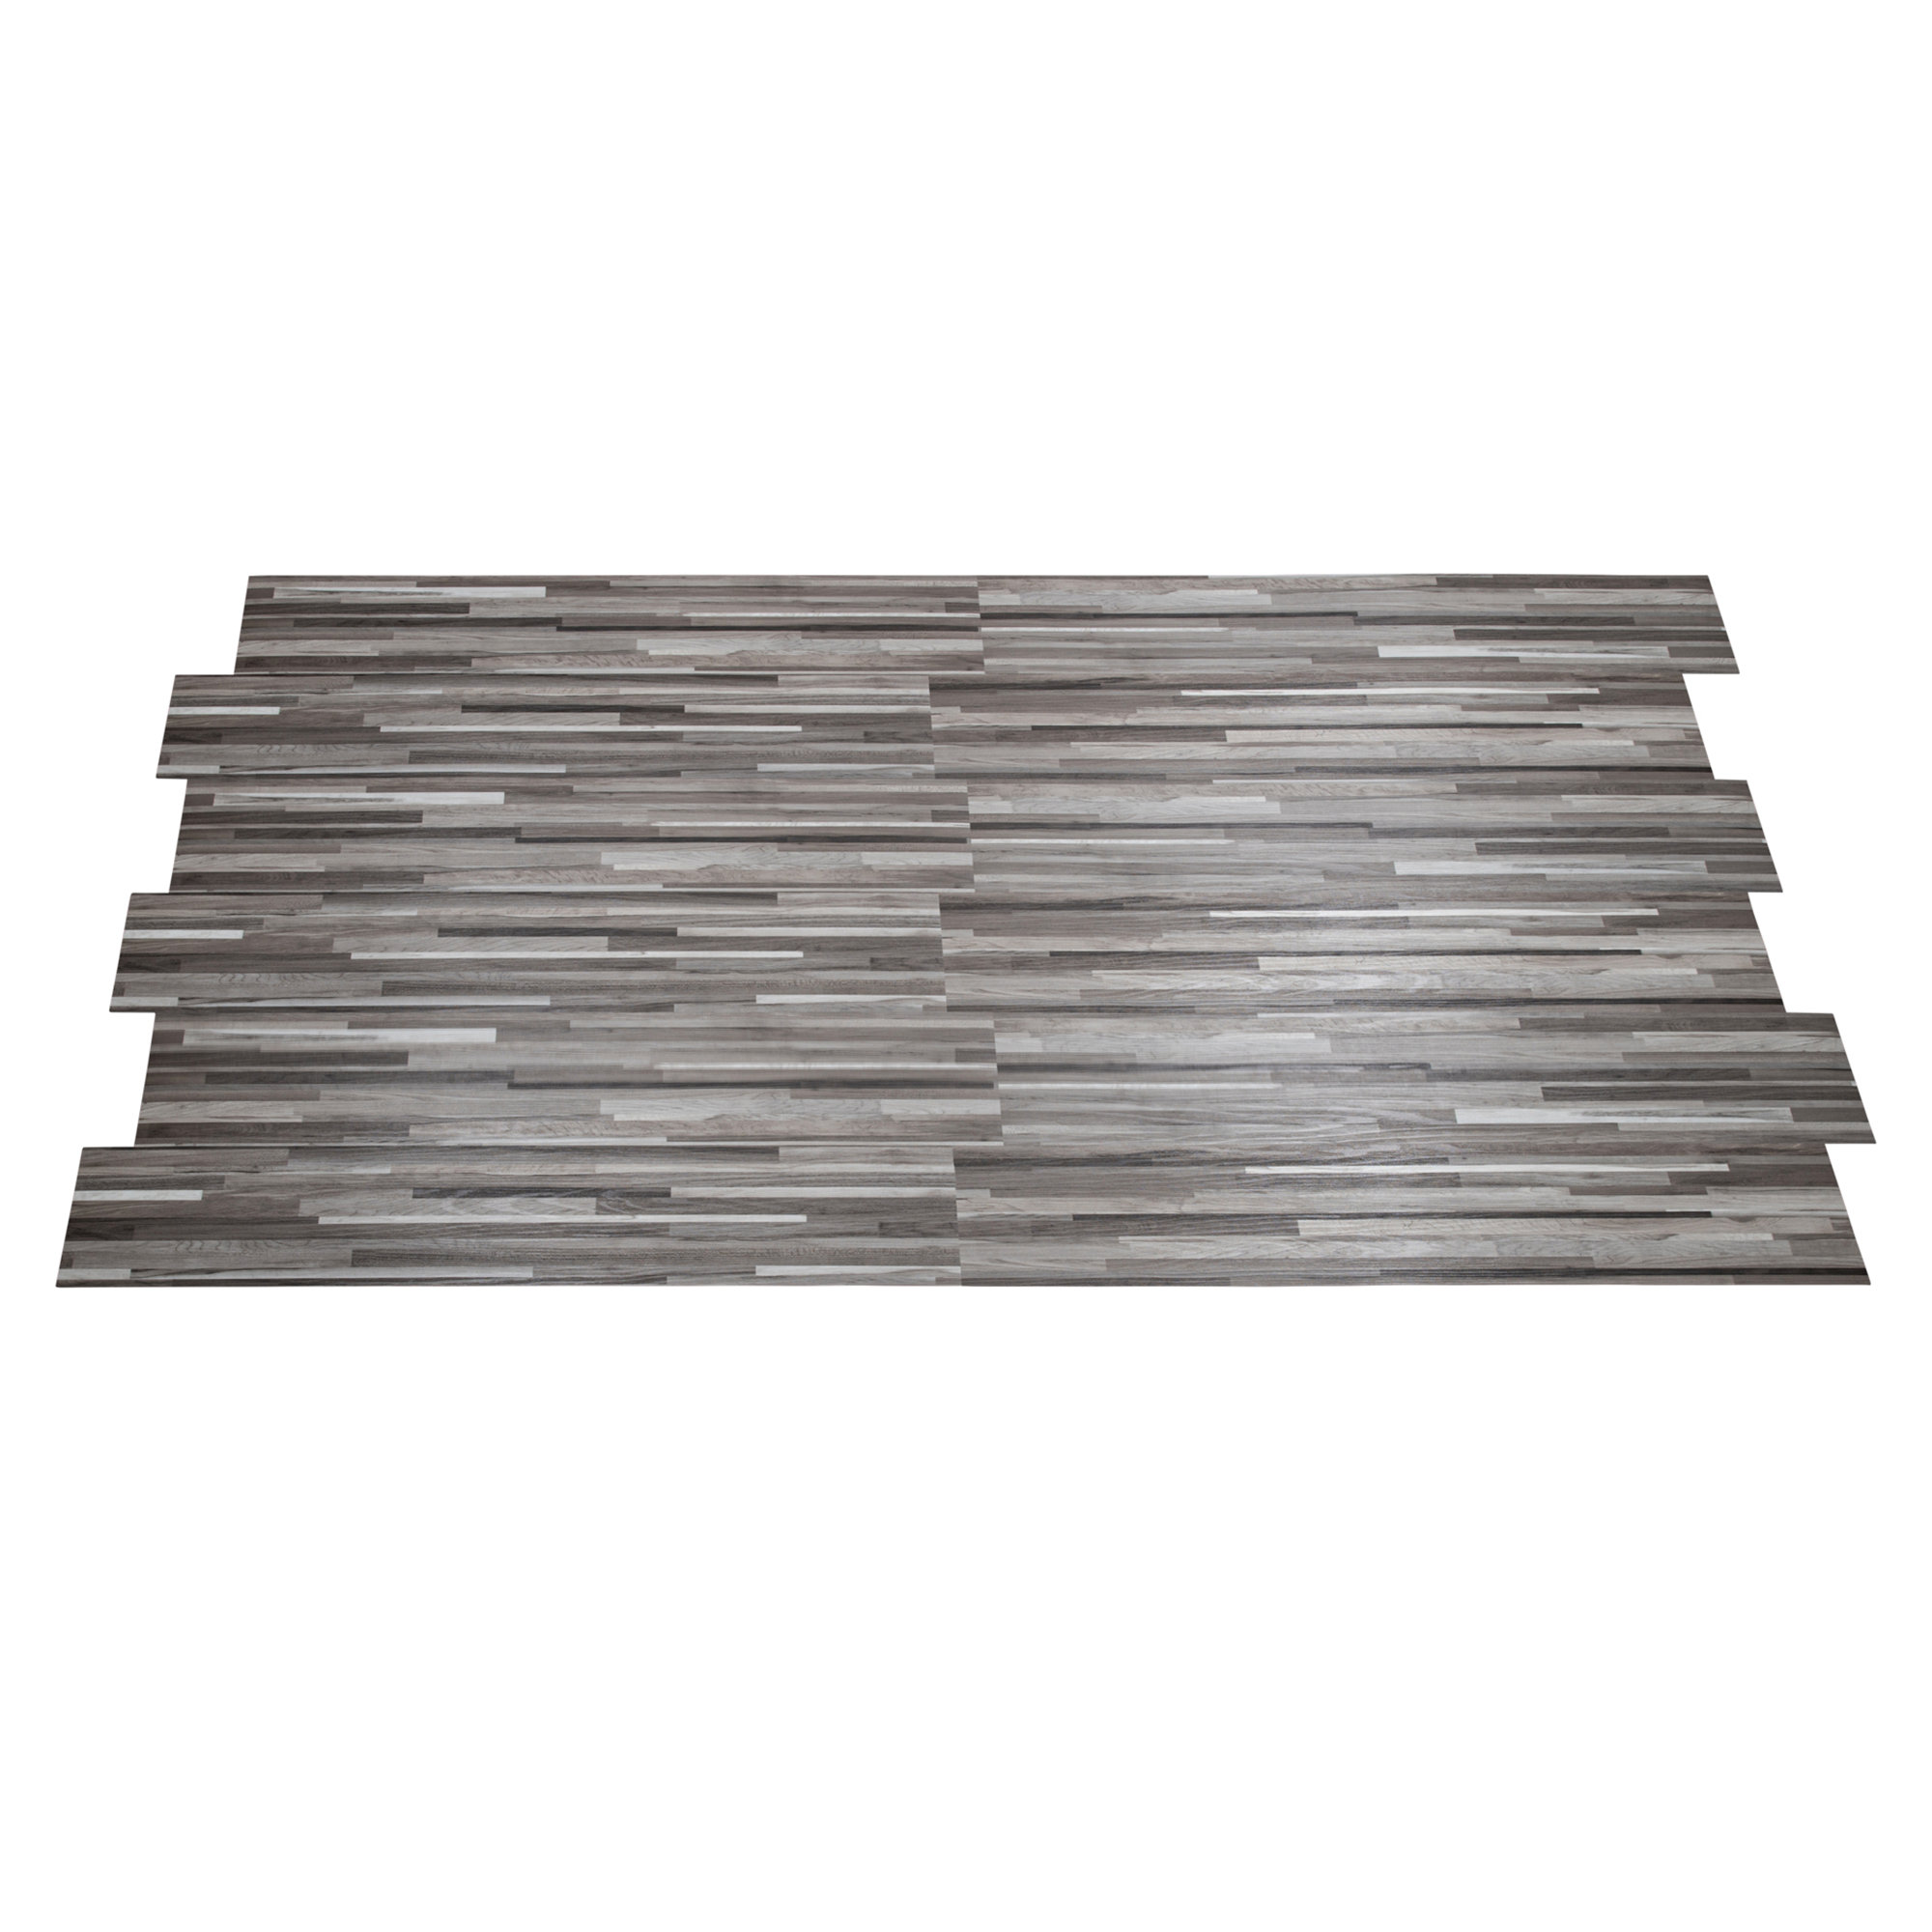 Lucida USA Basecore Cotton 6 In. X 36 In. 2Mm Peel & Stick Vinyl Planks &  Reviews - Wayfair Canada